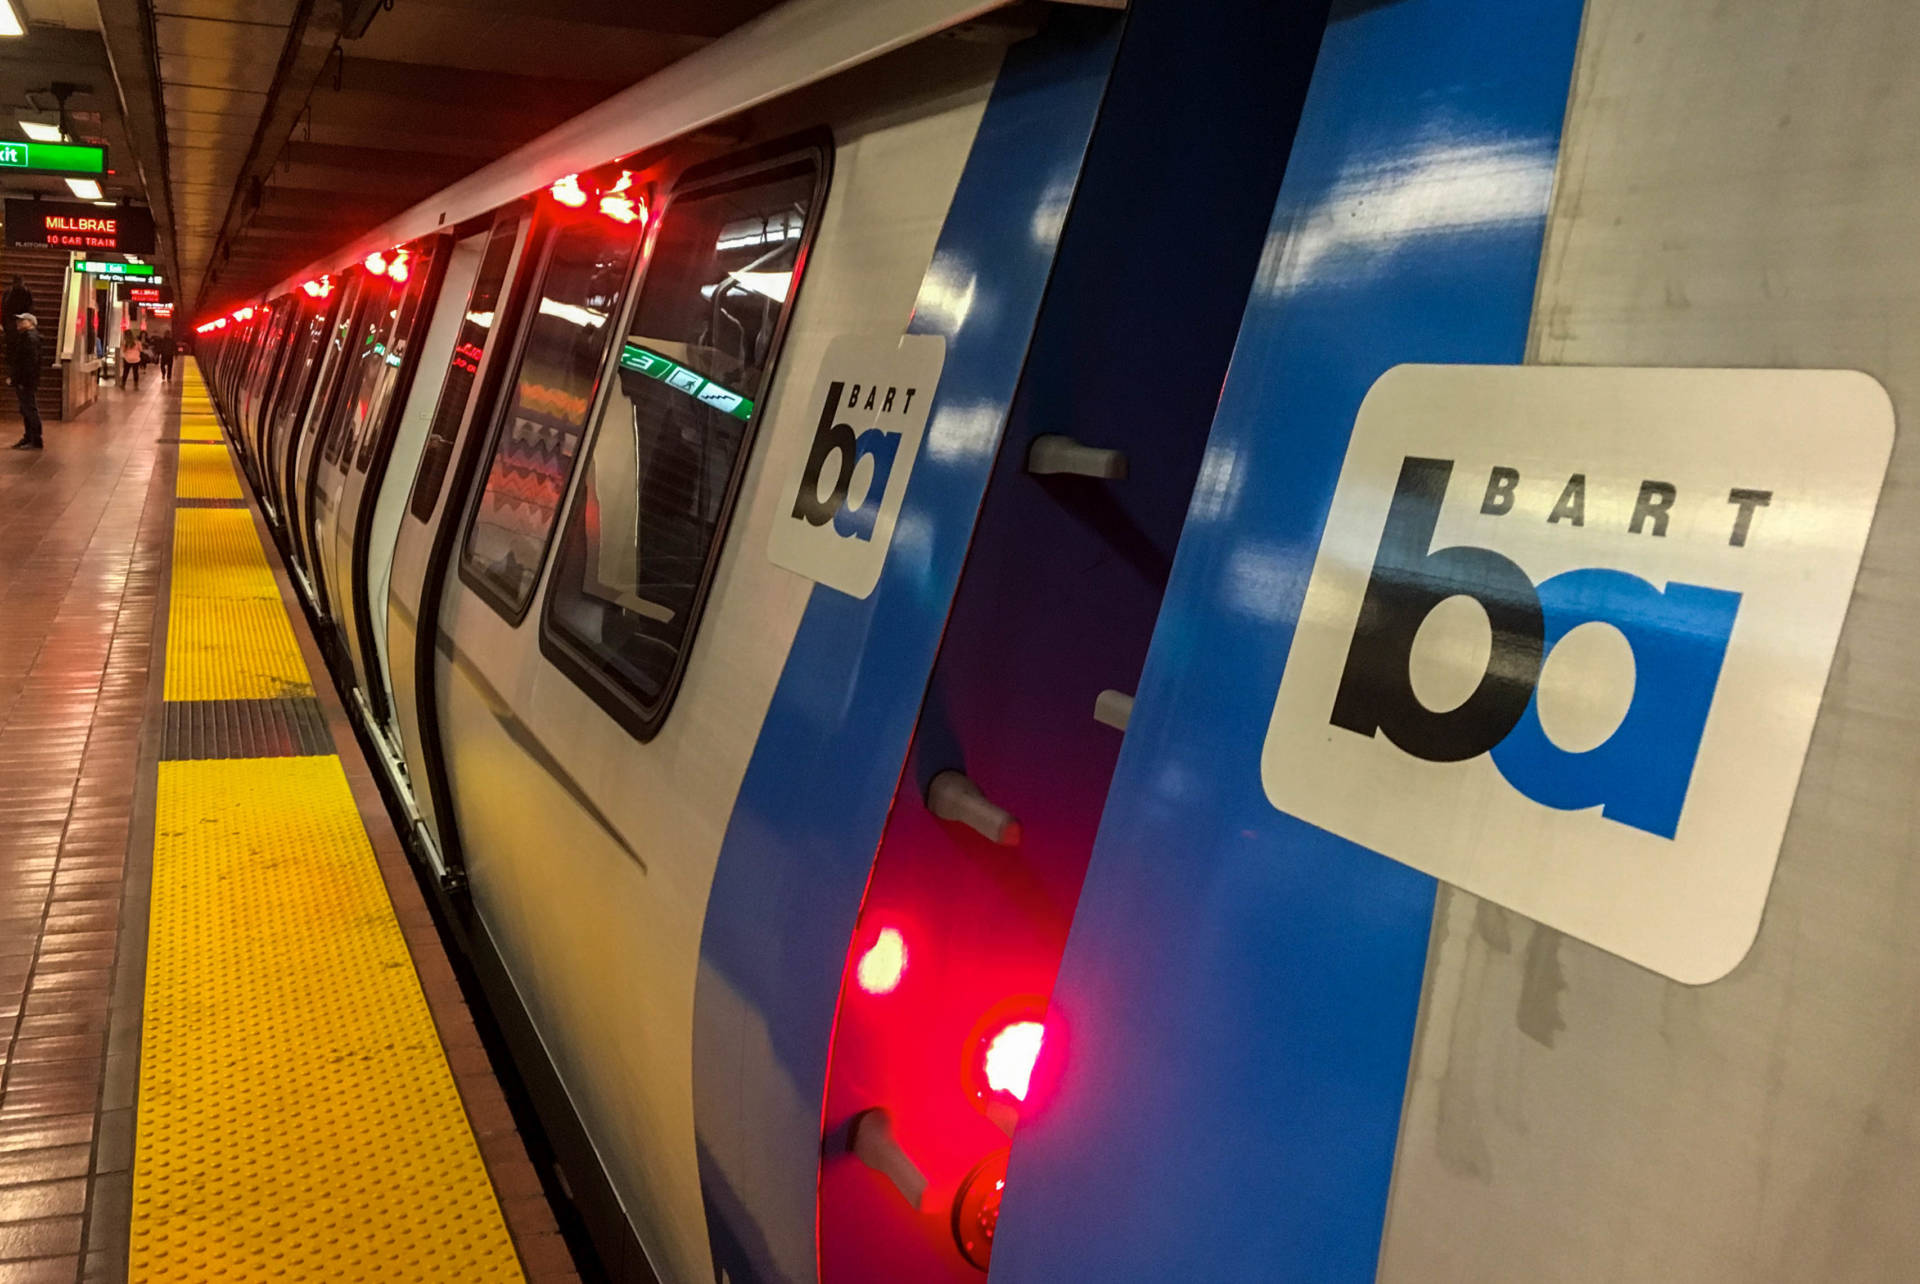 One of BART's new Fleet of the Future trains at San Francisco's 16th Street/Mission Station. Dan Brekke/KQED